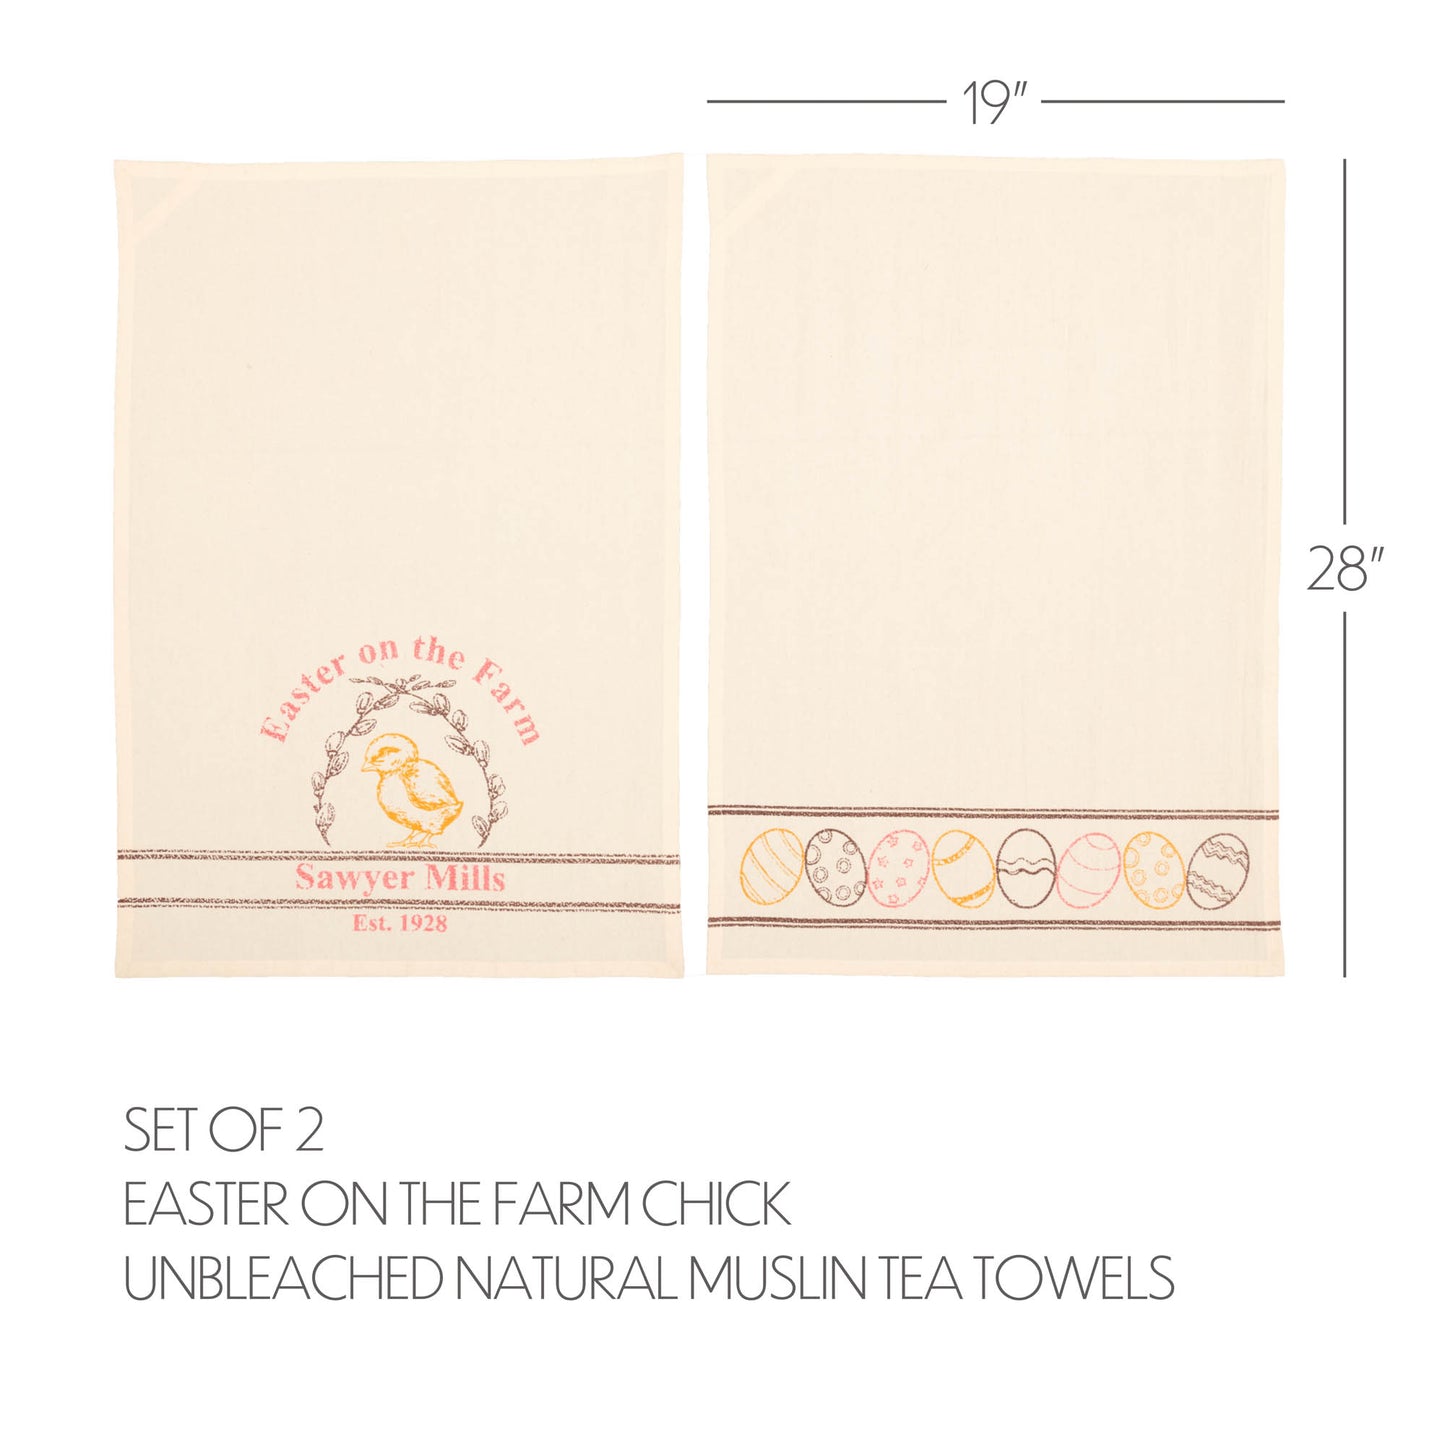 63026-Sawyer-Mill-Easter-on-the-Farm-Chick-Unbleached-Natural-Muslin-Tea-Towel-Set-of-2-19x28-image-1